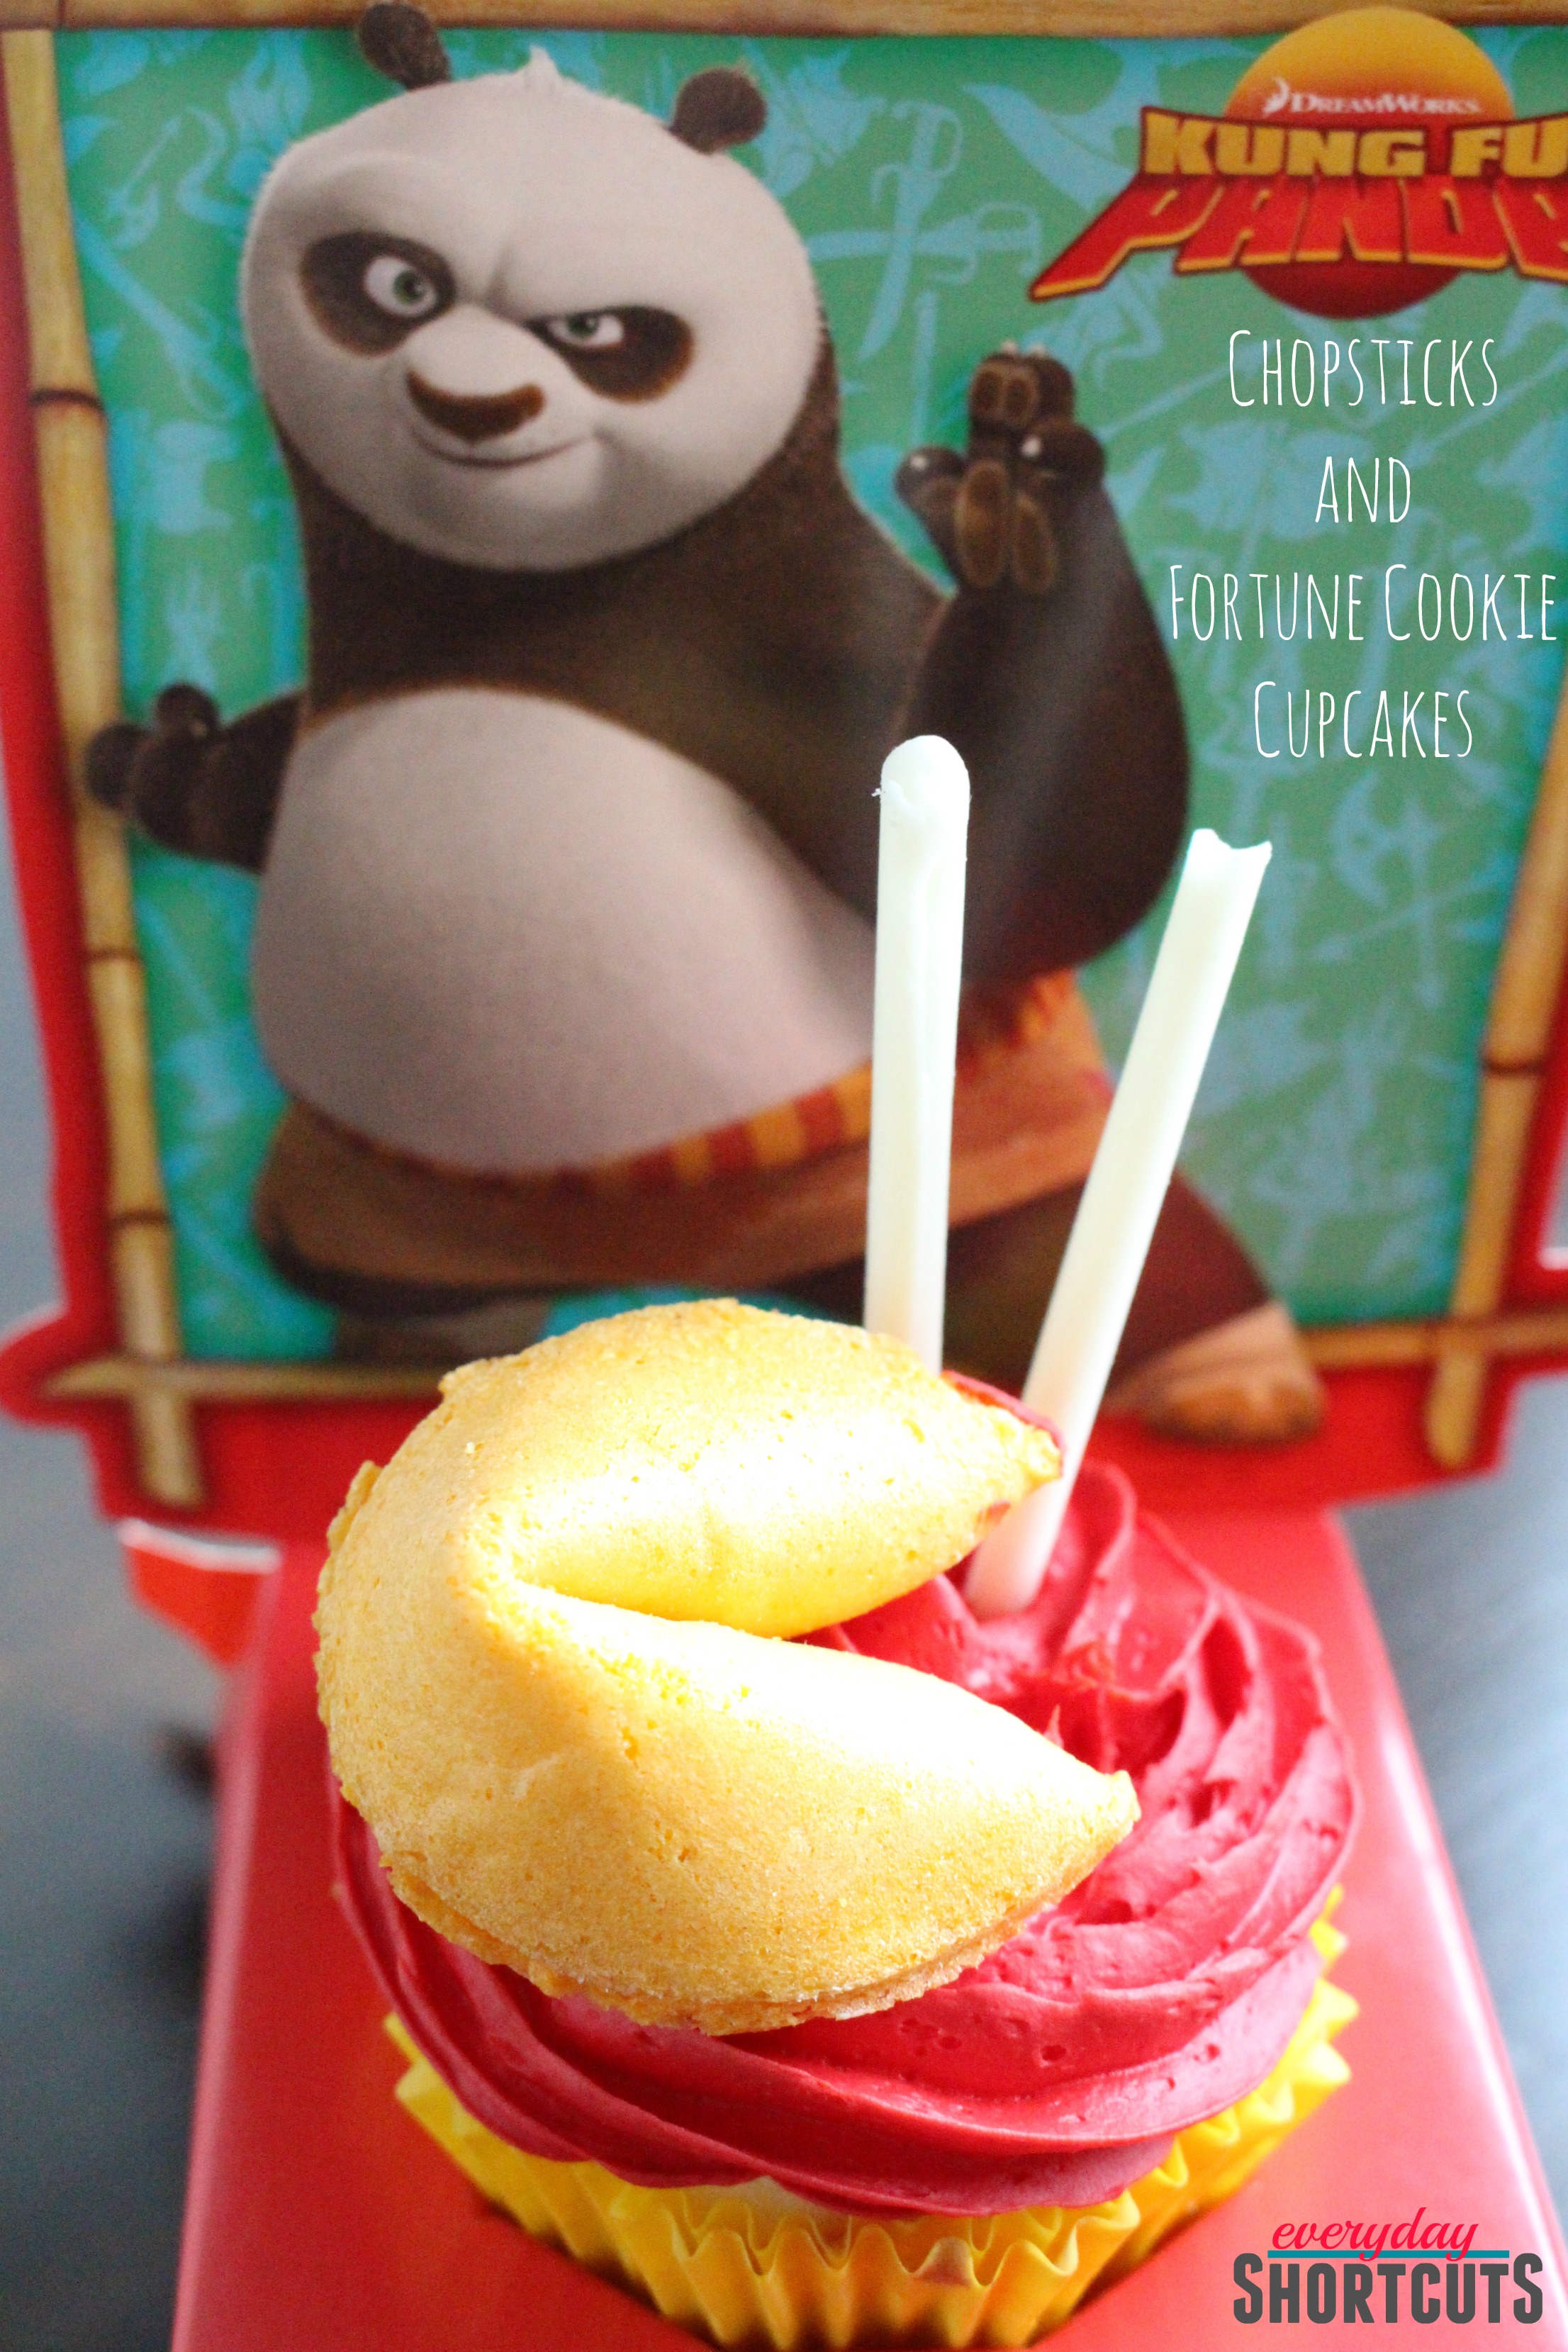 Kung Fu Panda Chopsticks and Fortune Cookie Cupcakes